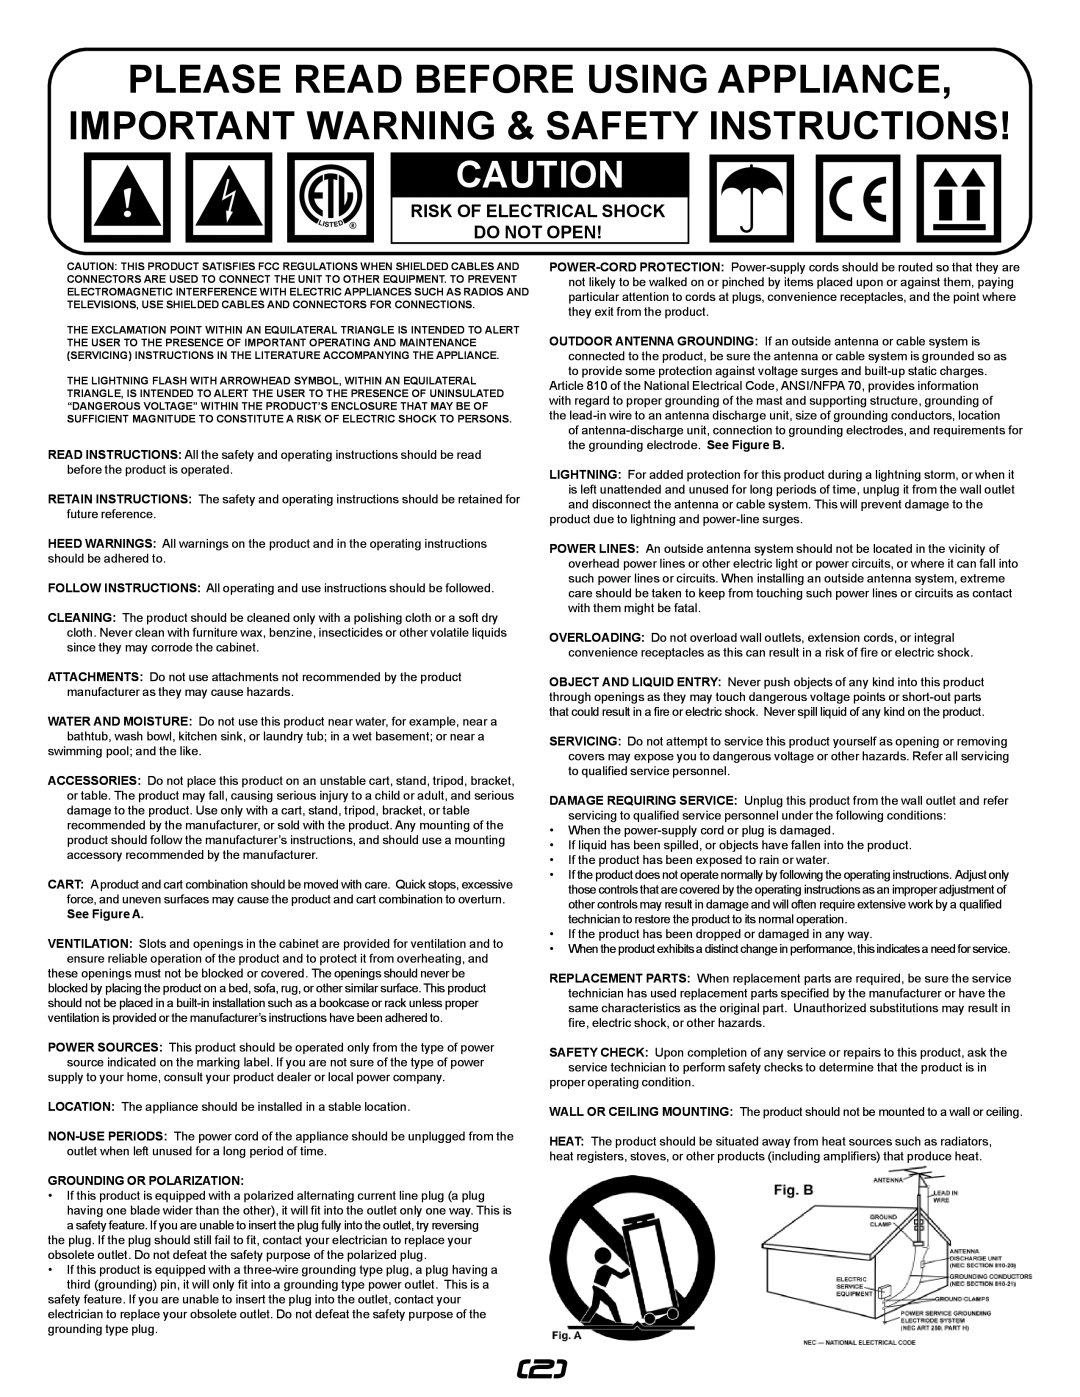 Gemini UZ-9128, UZ-1128 manual Please Read Before Using Appliance, Important Warning & Safety Instructions, See Figure A 